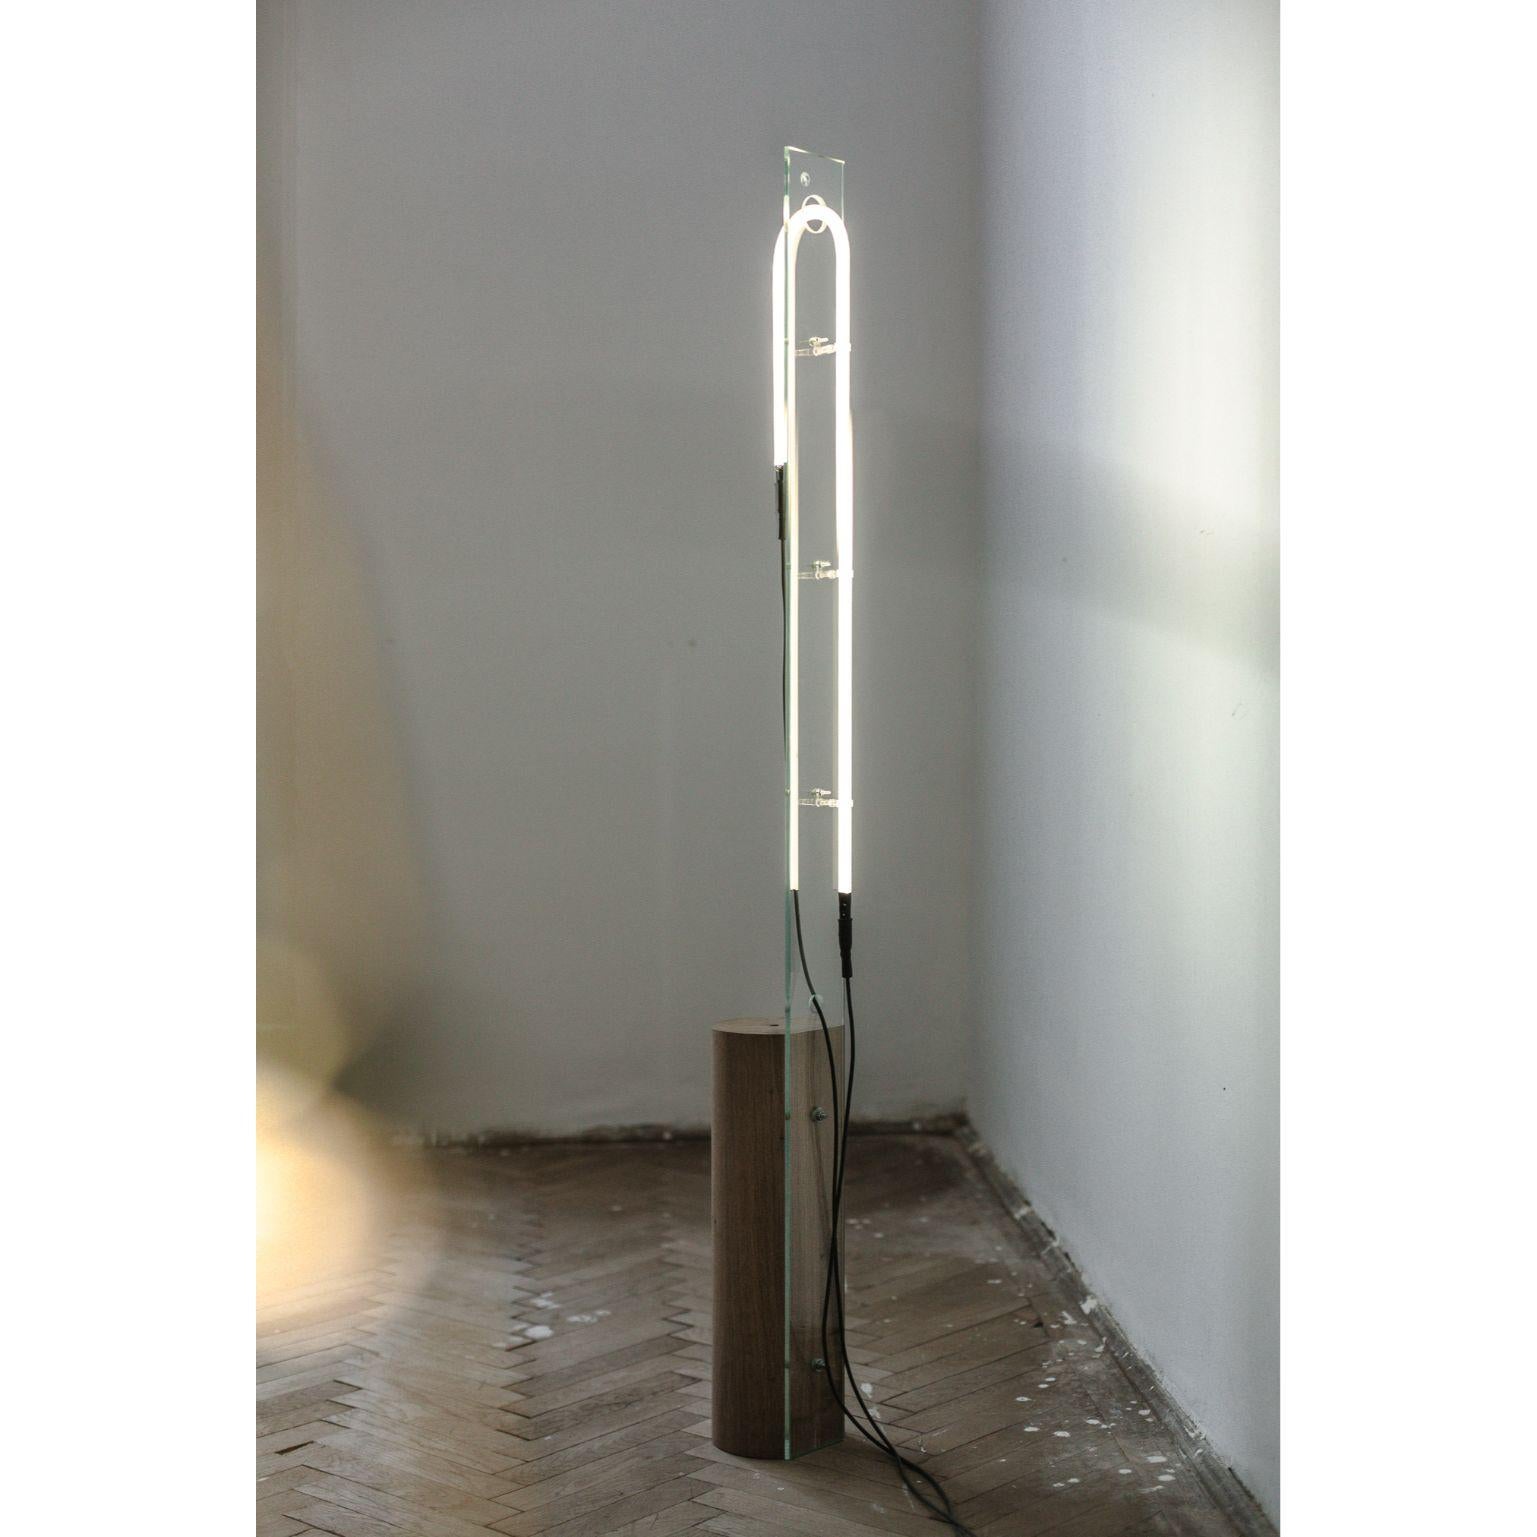 8 minutes straight by Radu Abraham.
Materials: Oak wood, glass, custom made light tube
Dimensions: 15 x 15 x 170 cm.

All our lamps can be wired according to each country. If sold to the USA it will be wired for the USA for instance.

The base